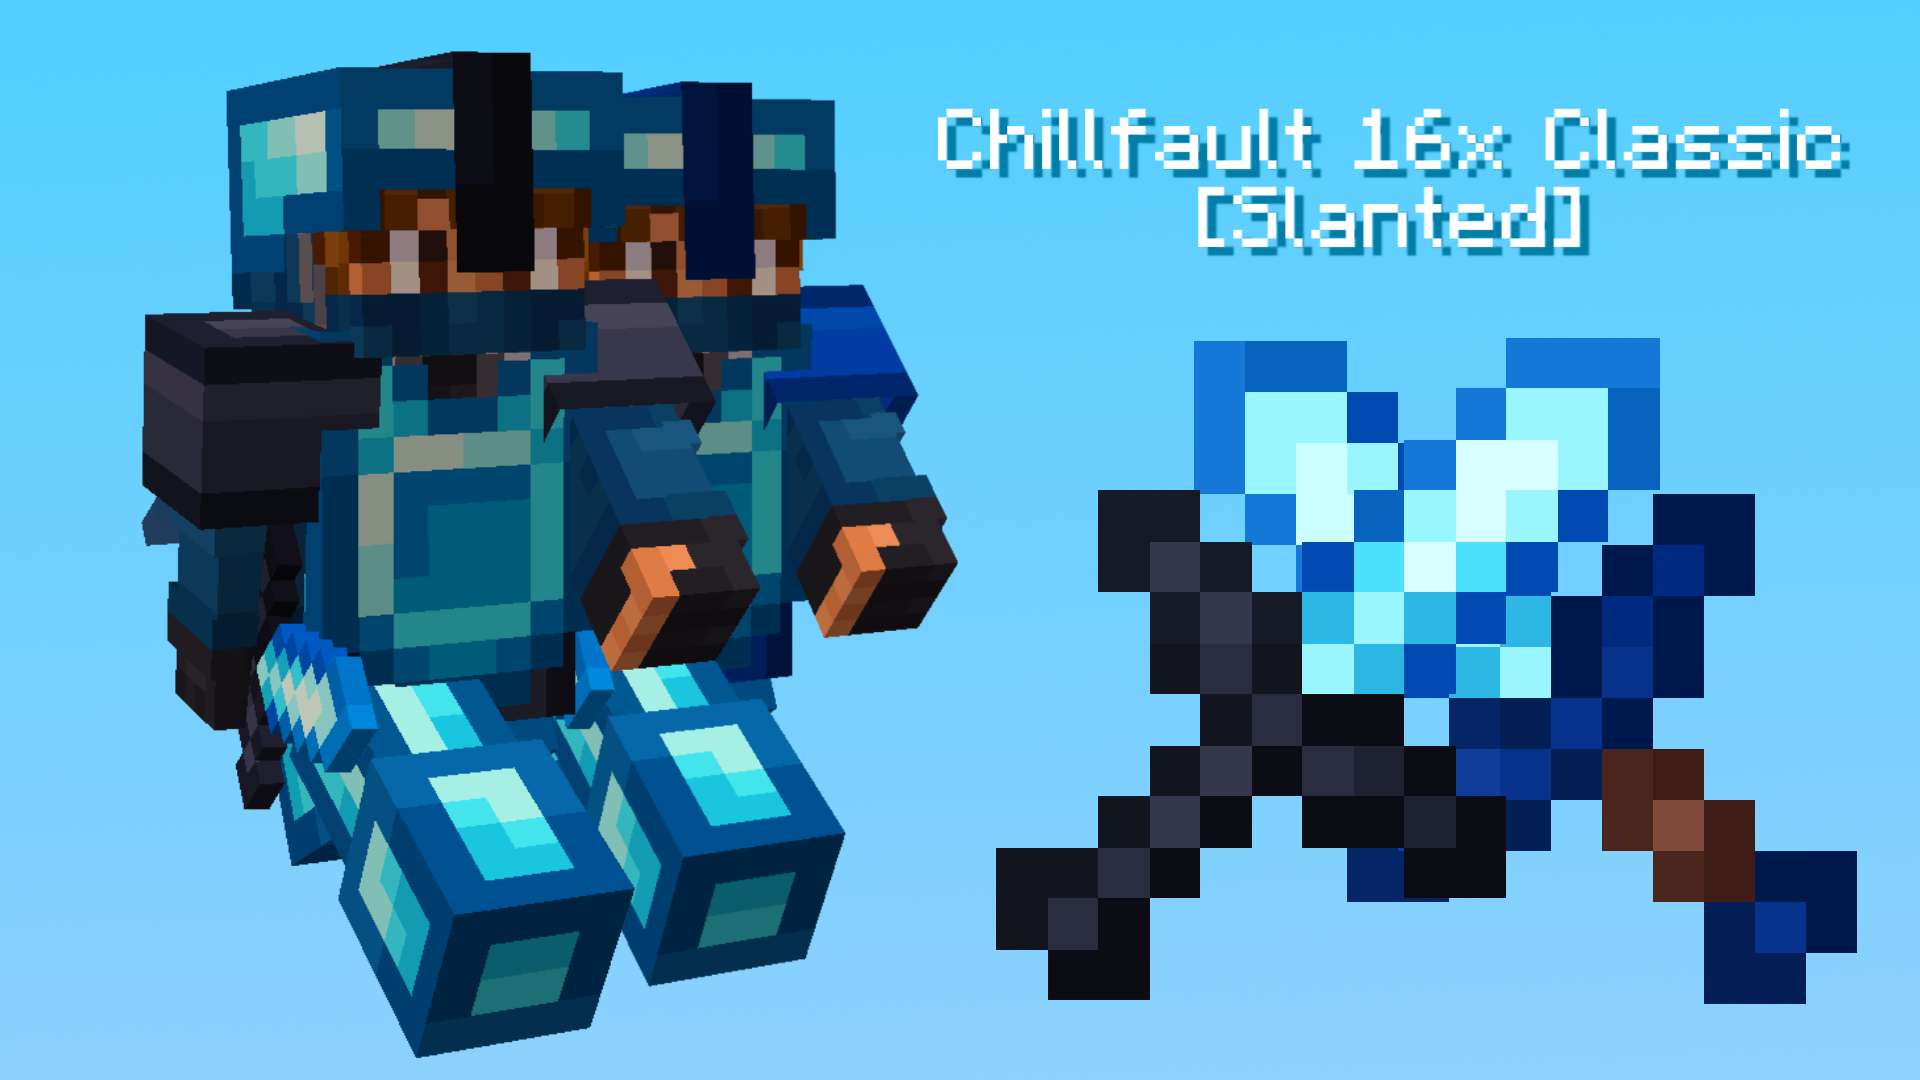 Chillfault 16x Classic [Slanted] 16 by Jes13 on PvPRP